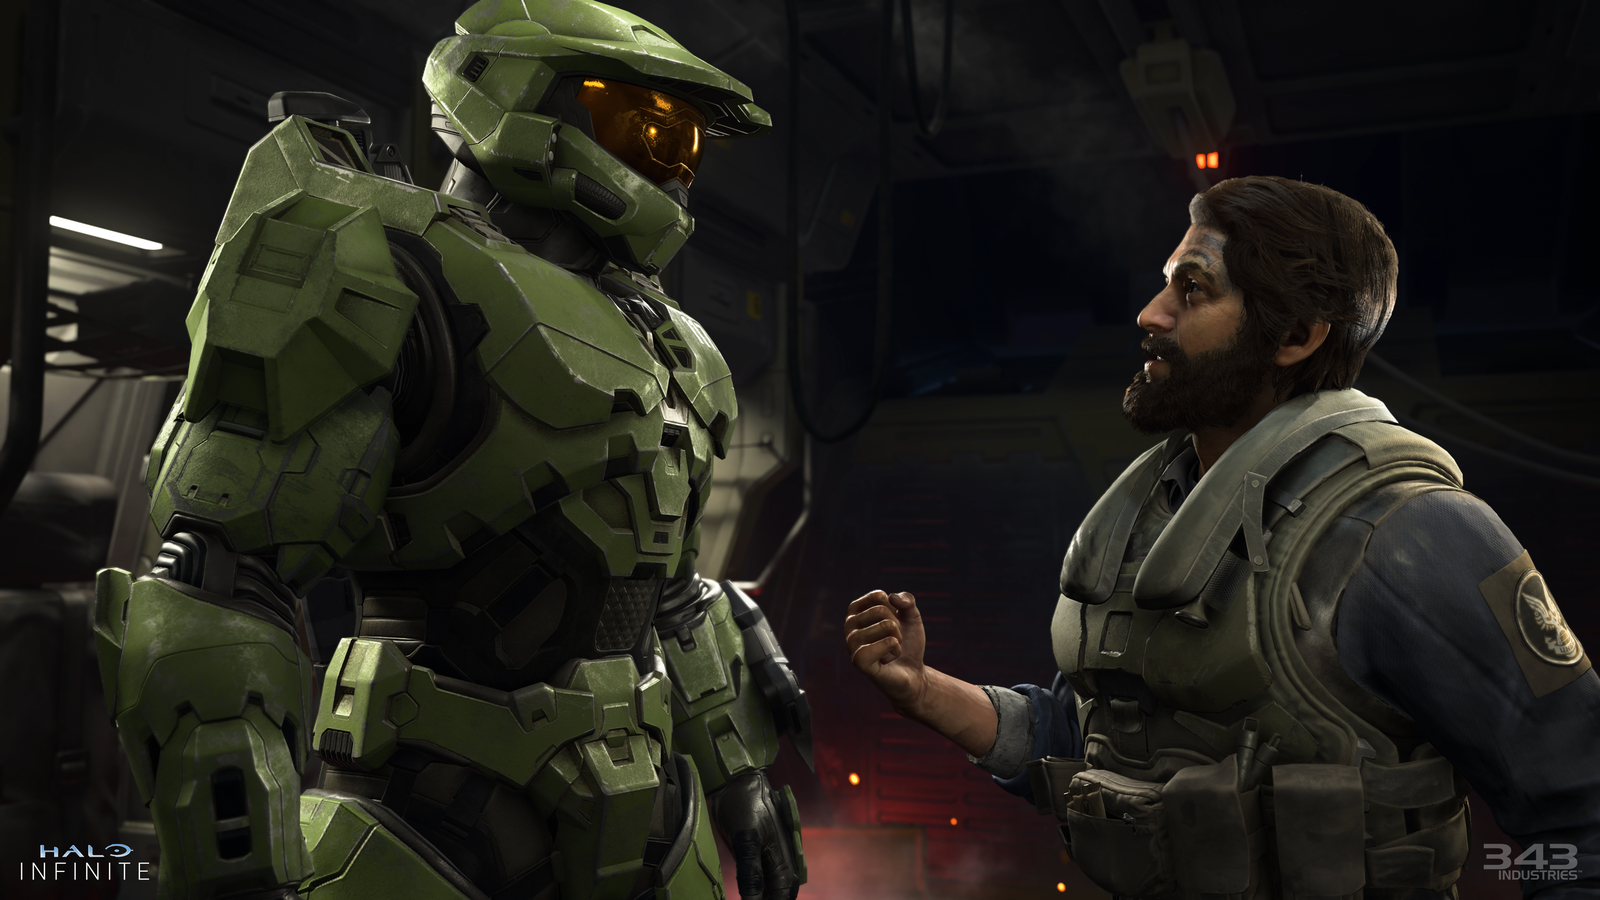 Halo: Master Chief Collection coming to PC - Polygon